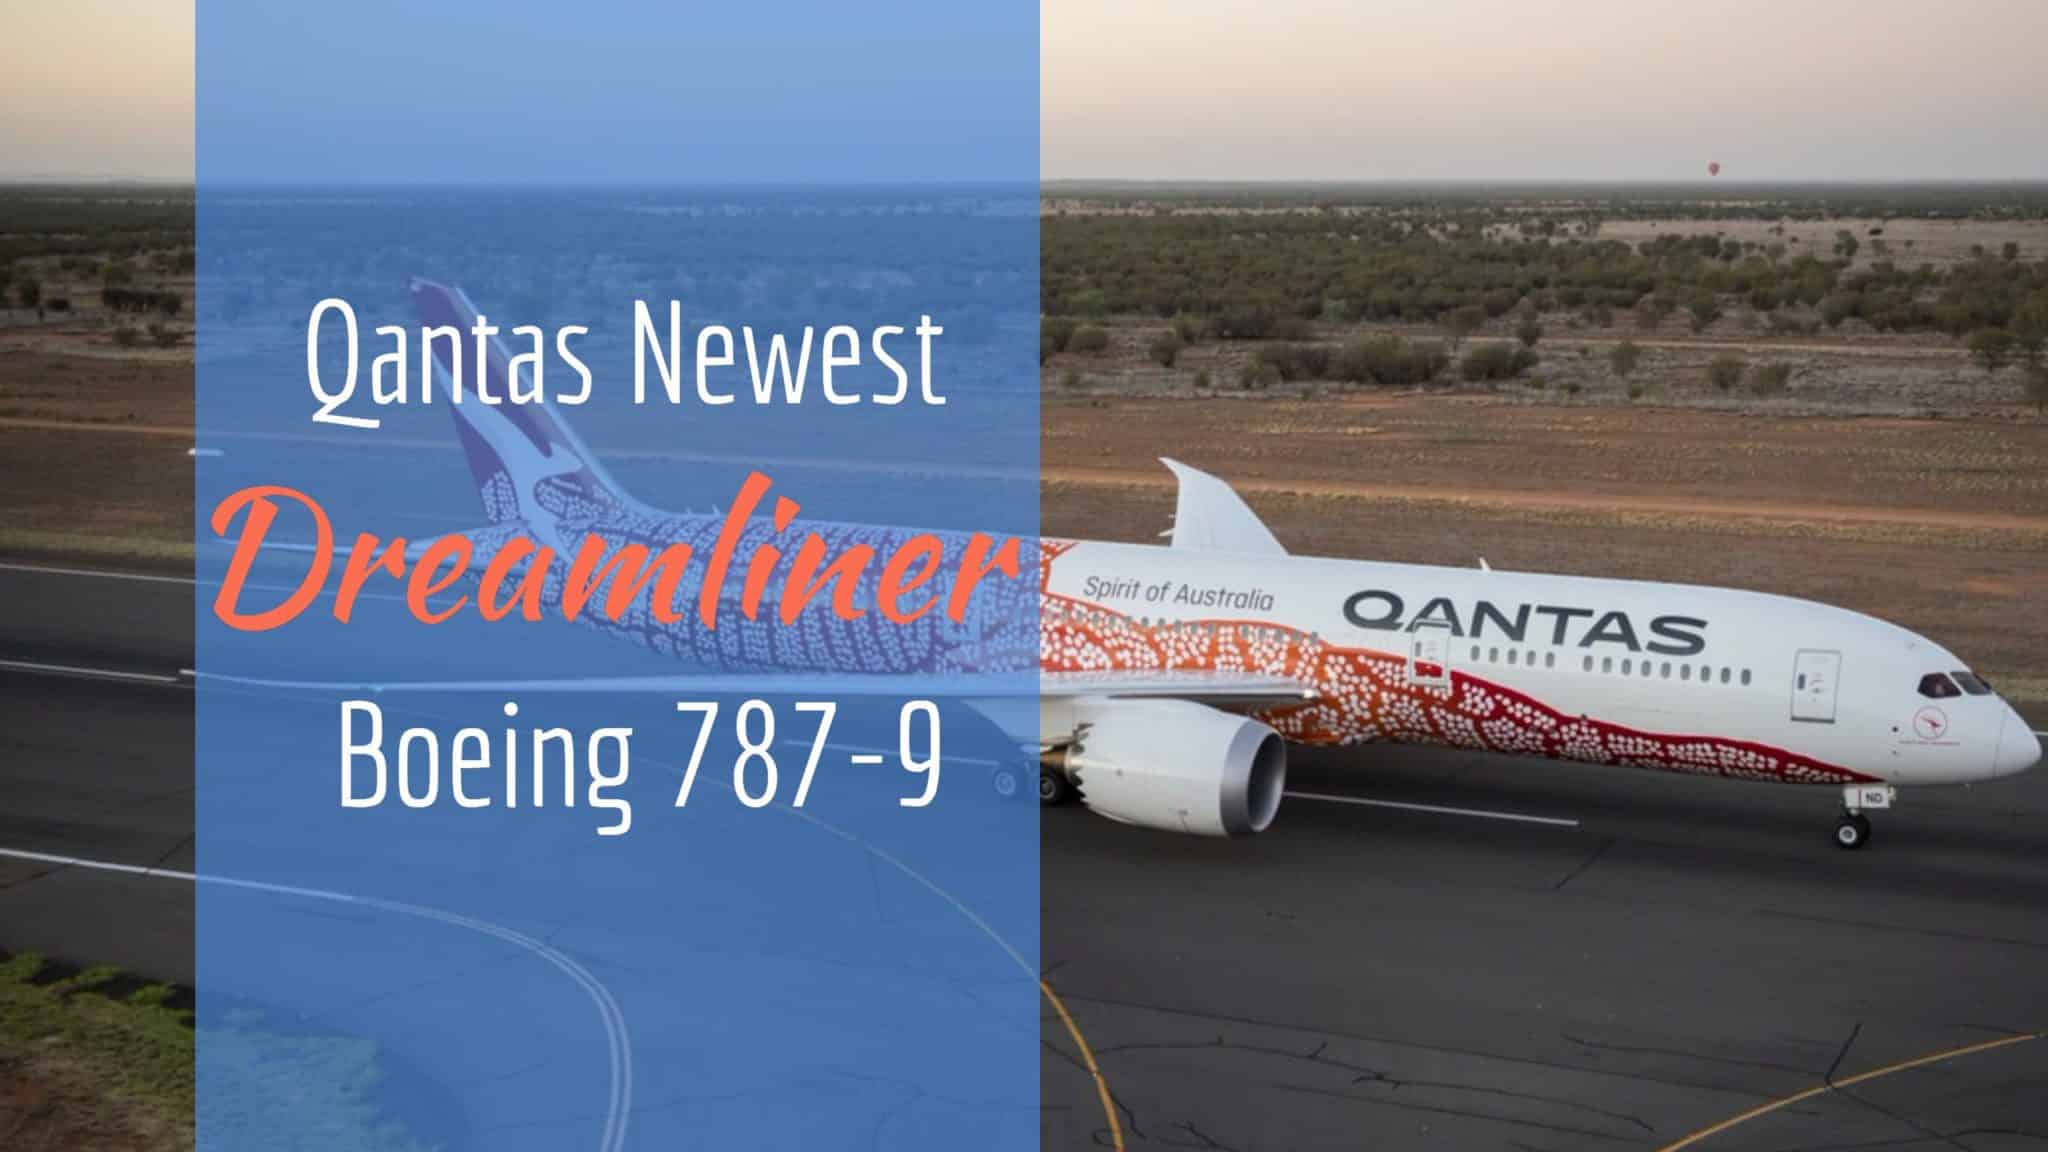 Qantas welcomes home its newest Boeing 787 Dreamliner with Indigenous Livery.